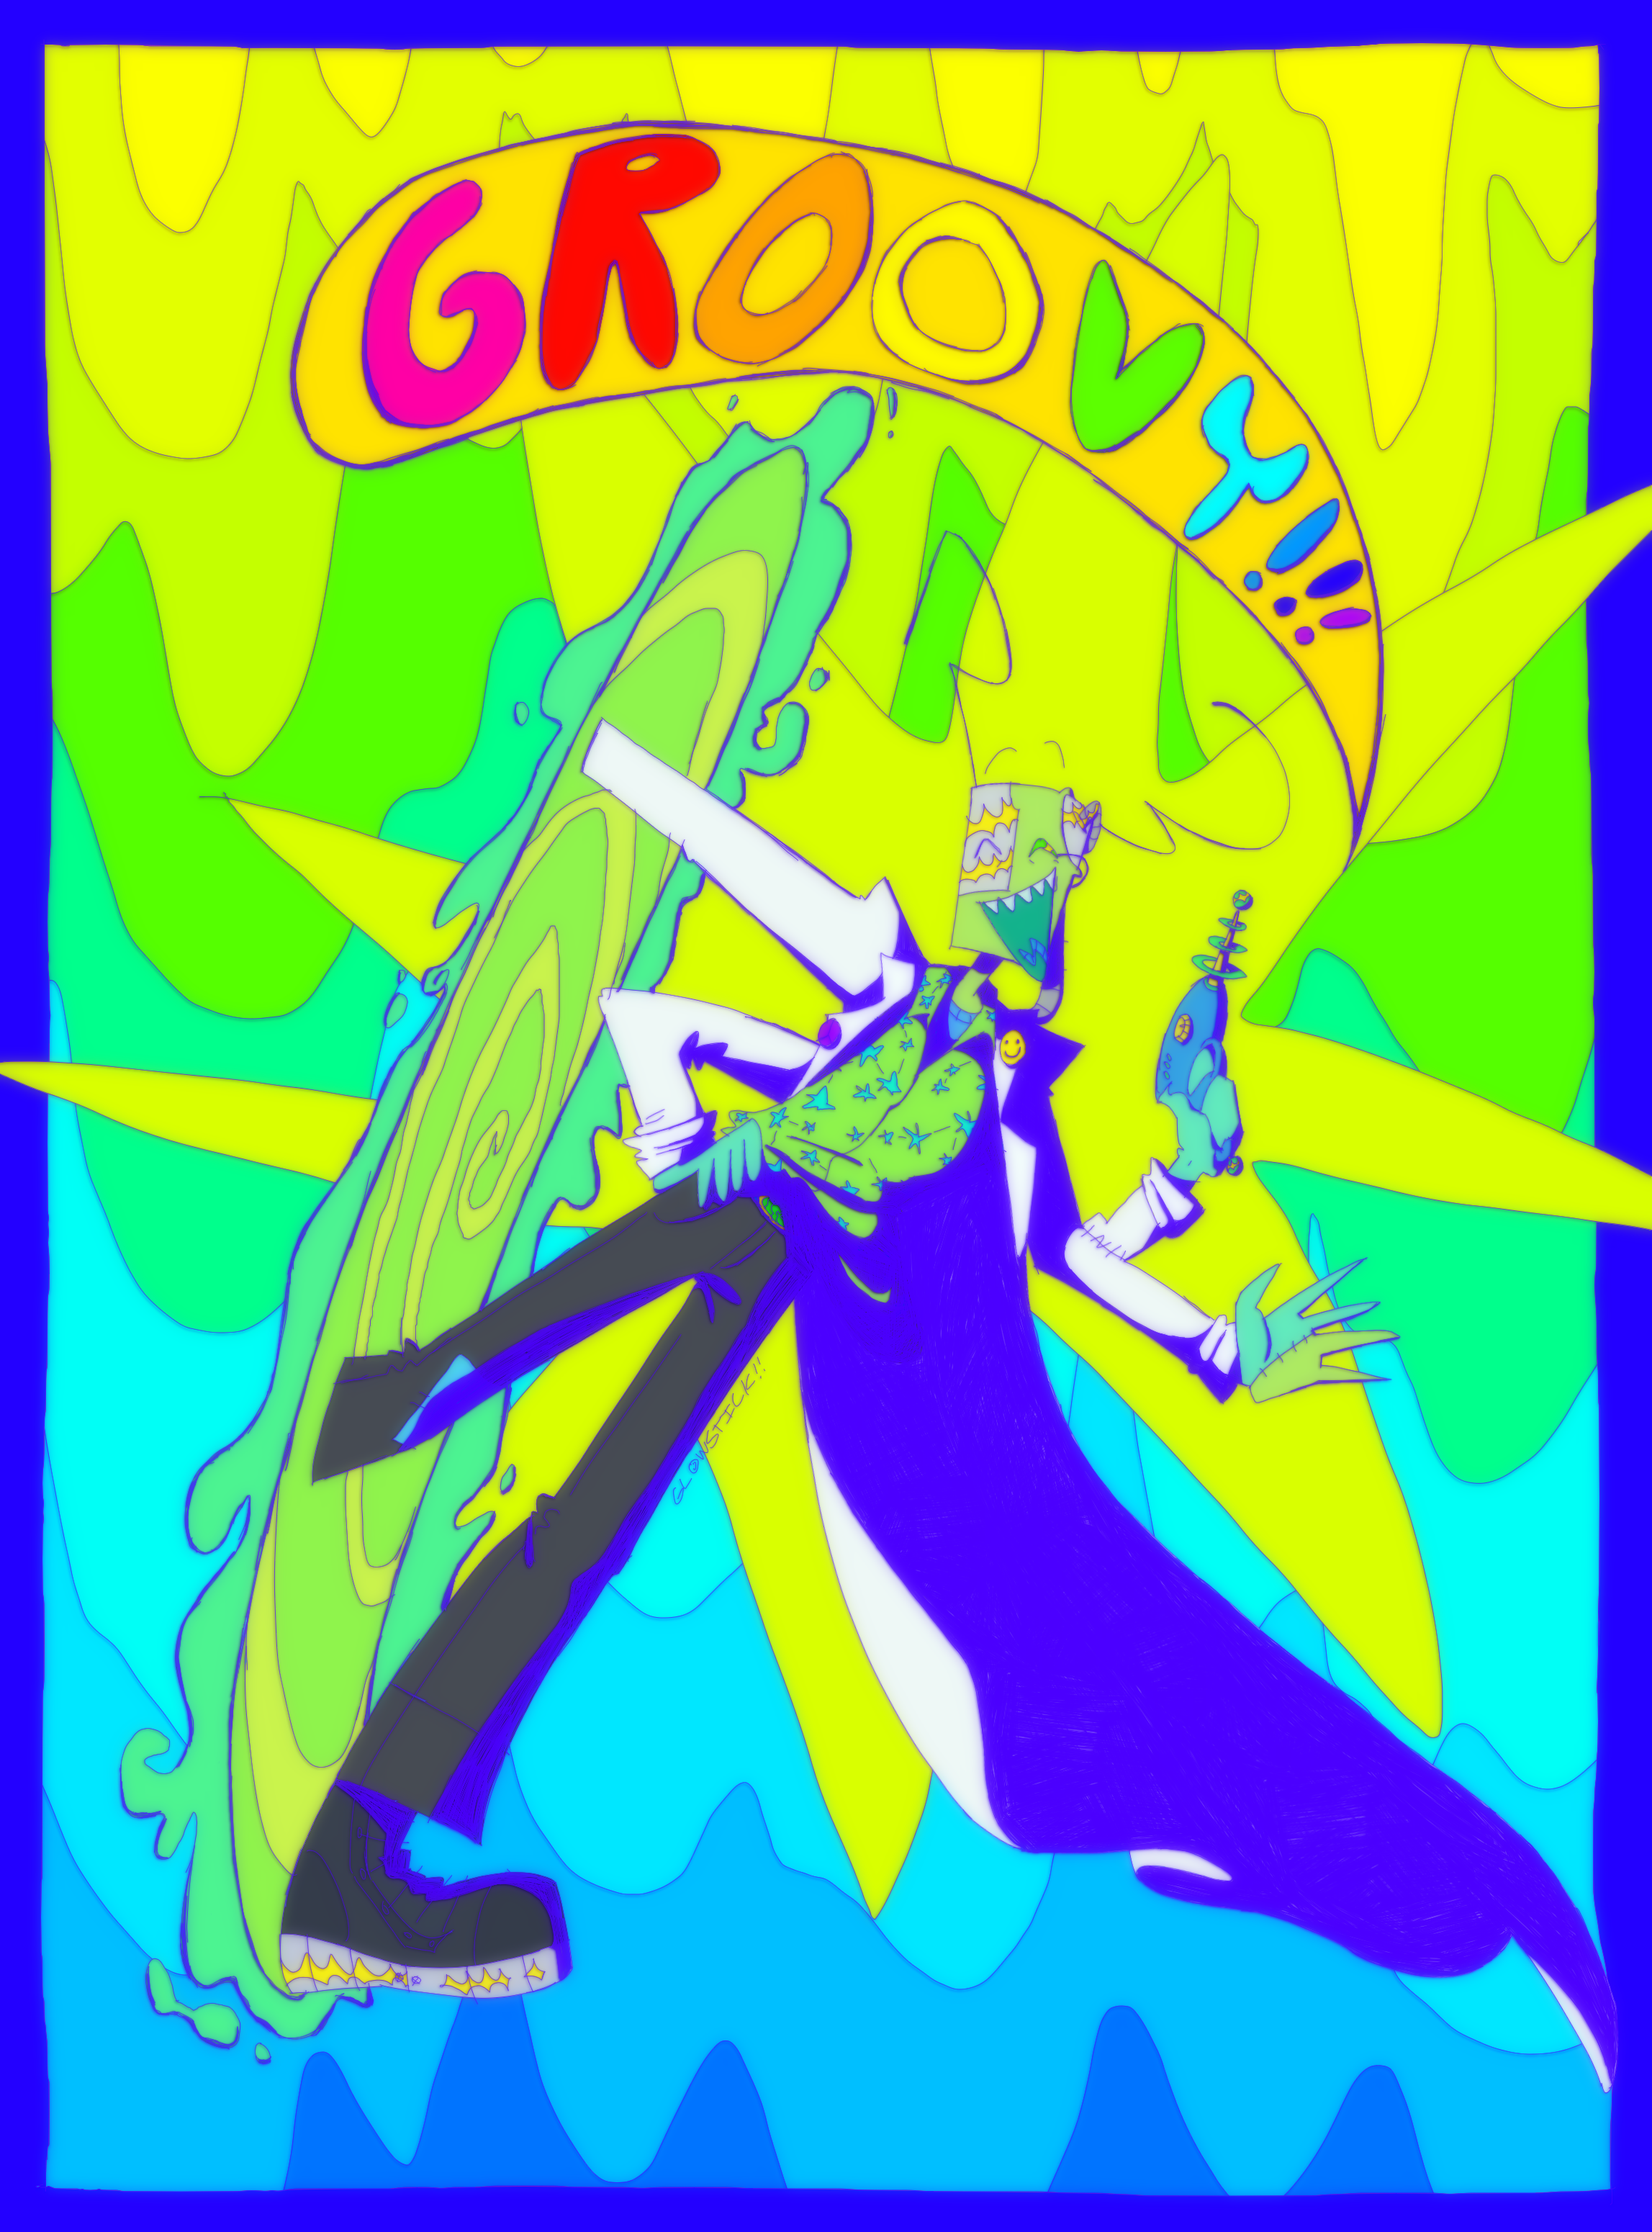 A brightly colored drawing of an irken oc. They're wearing a labcoat with pins and a starry button up shirt, and are holding a ray gun. They have two metal plates in their head and an extra pair of arms, one coming from their right side and the other connected at the left elbow.